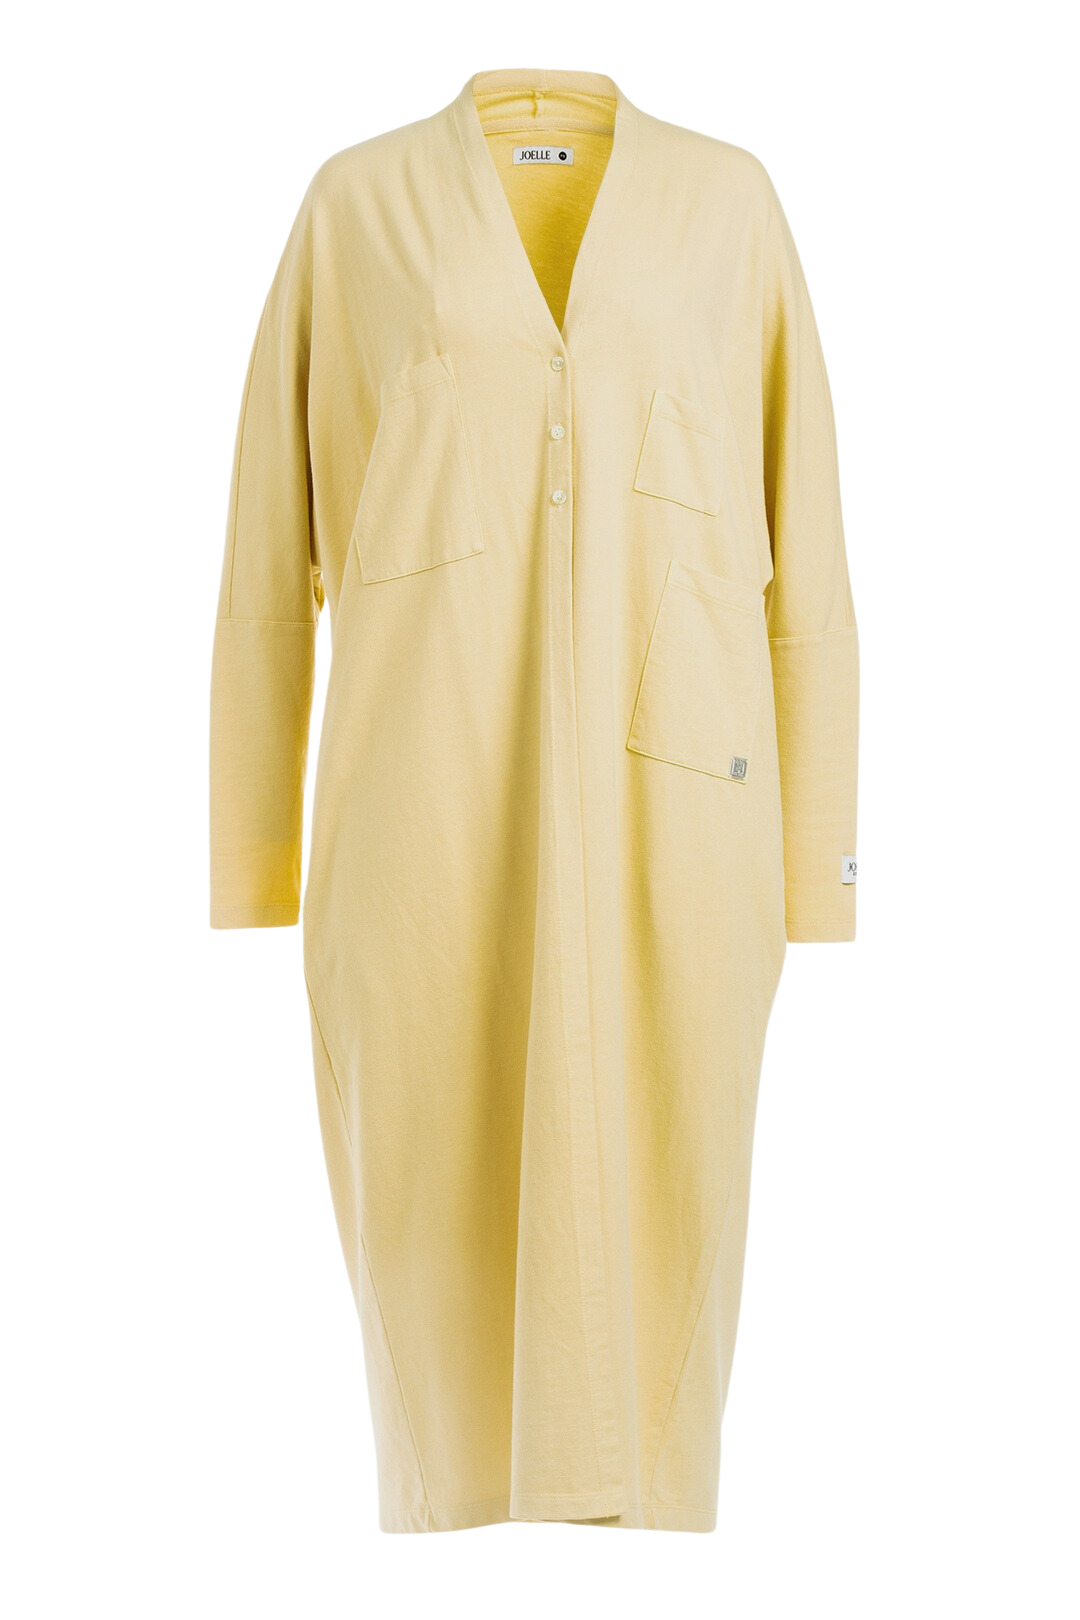 Long yellow knitted jacket | Christ